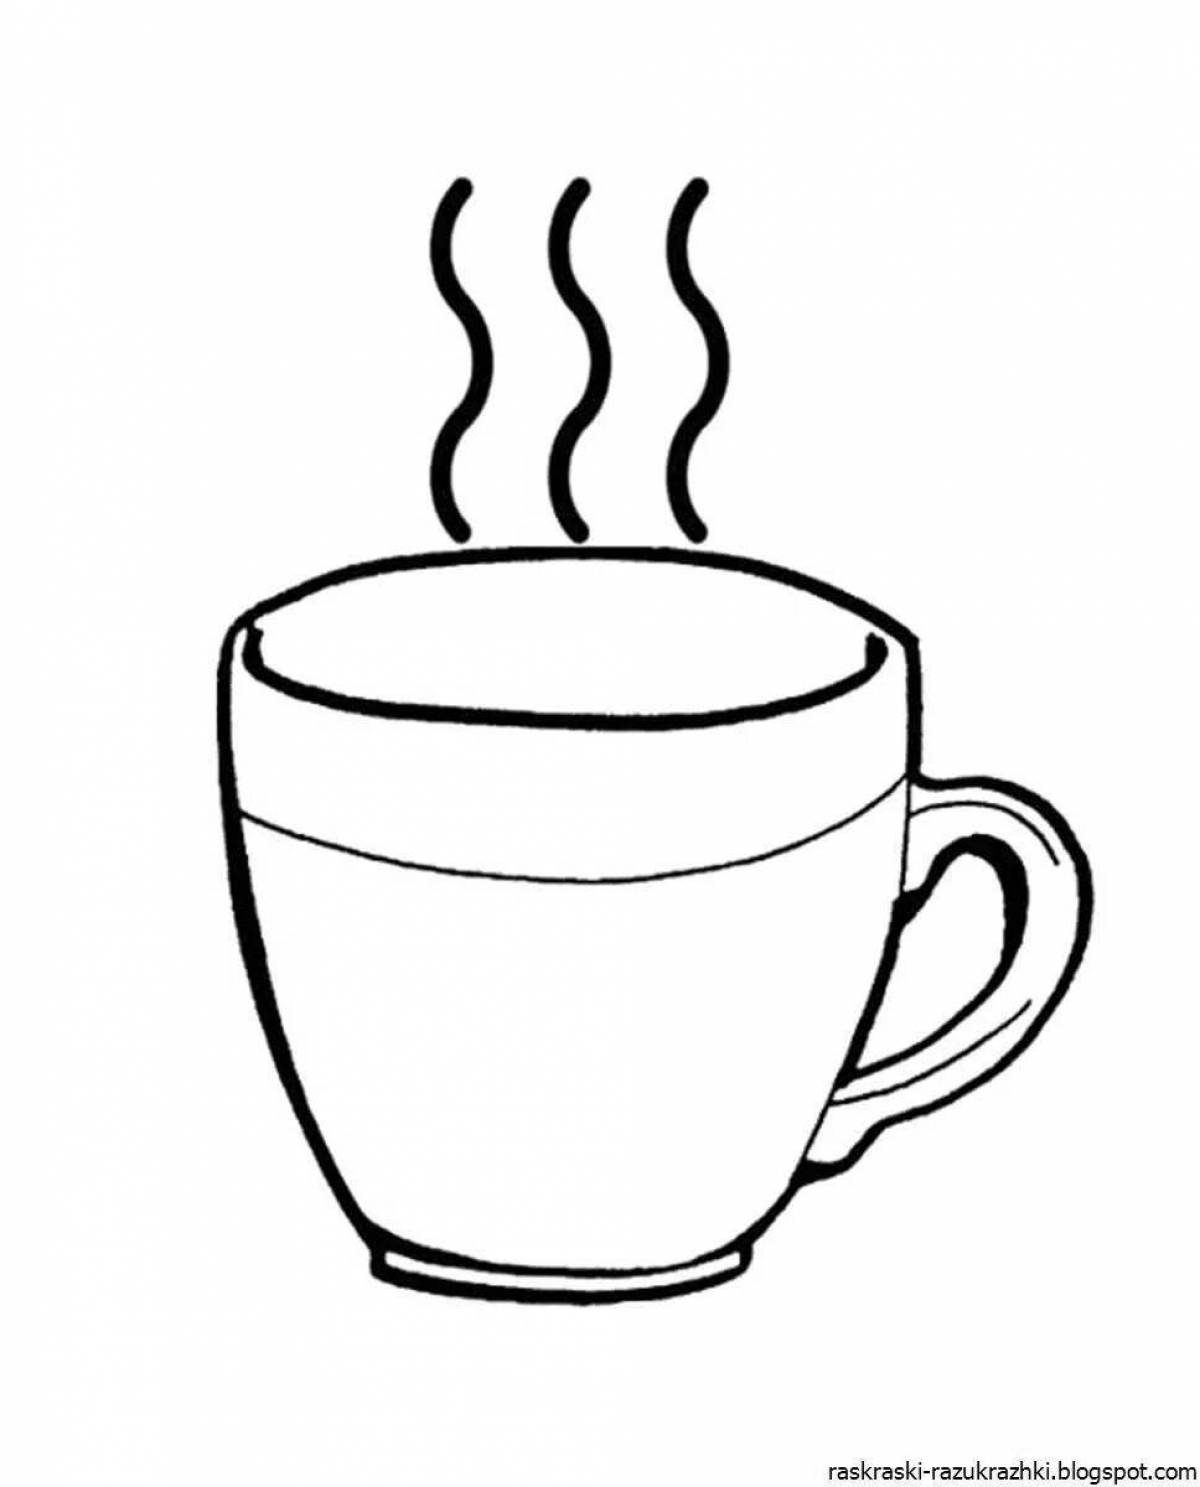 Luxury tea cup coloring page